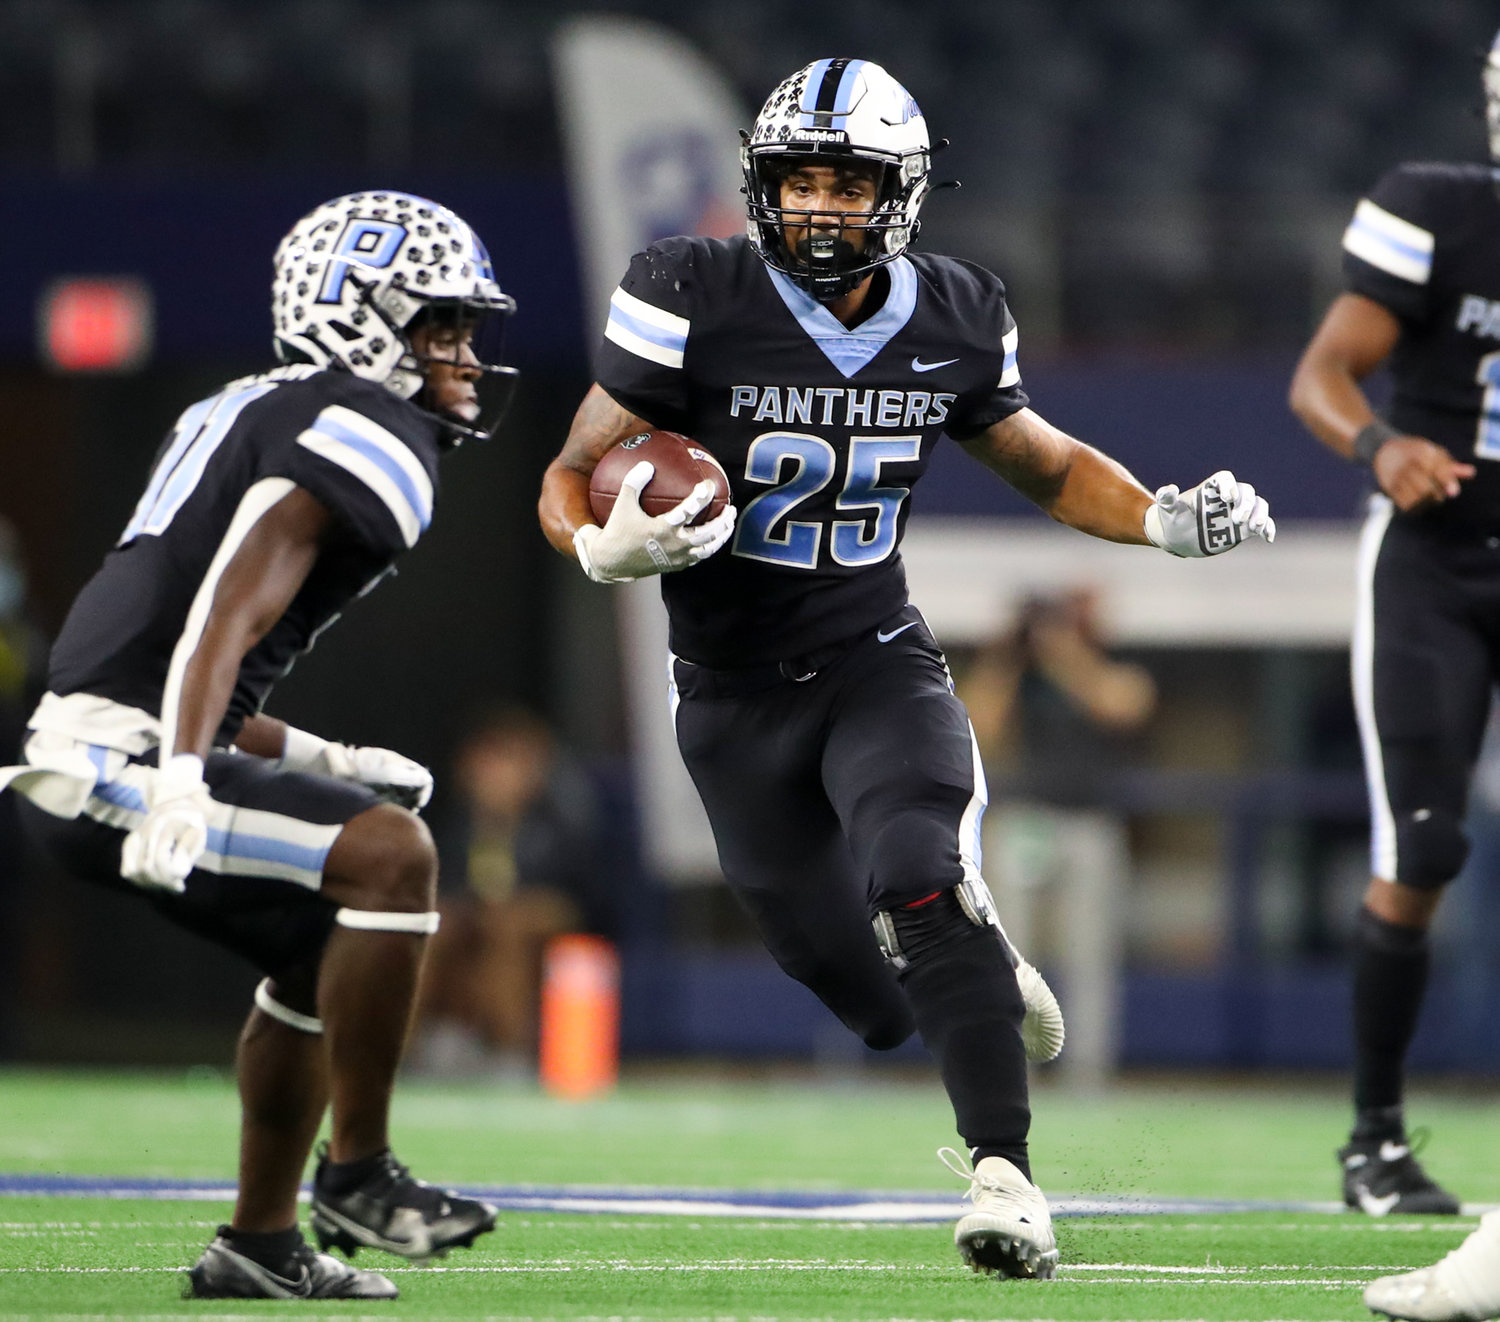 Paetow Panthers running back Jacob Brown (25) carries the ball during the Class 5A-Division I state football championship game between Paetow and College Station on December 17, 2021 in Arlington, Texas.